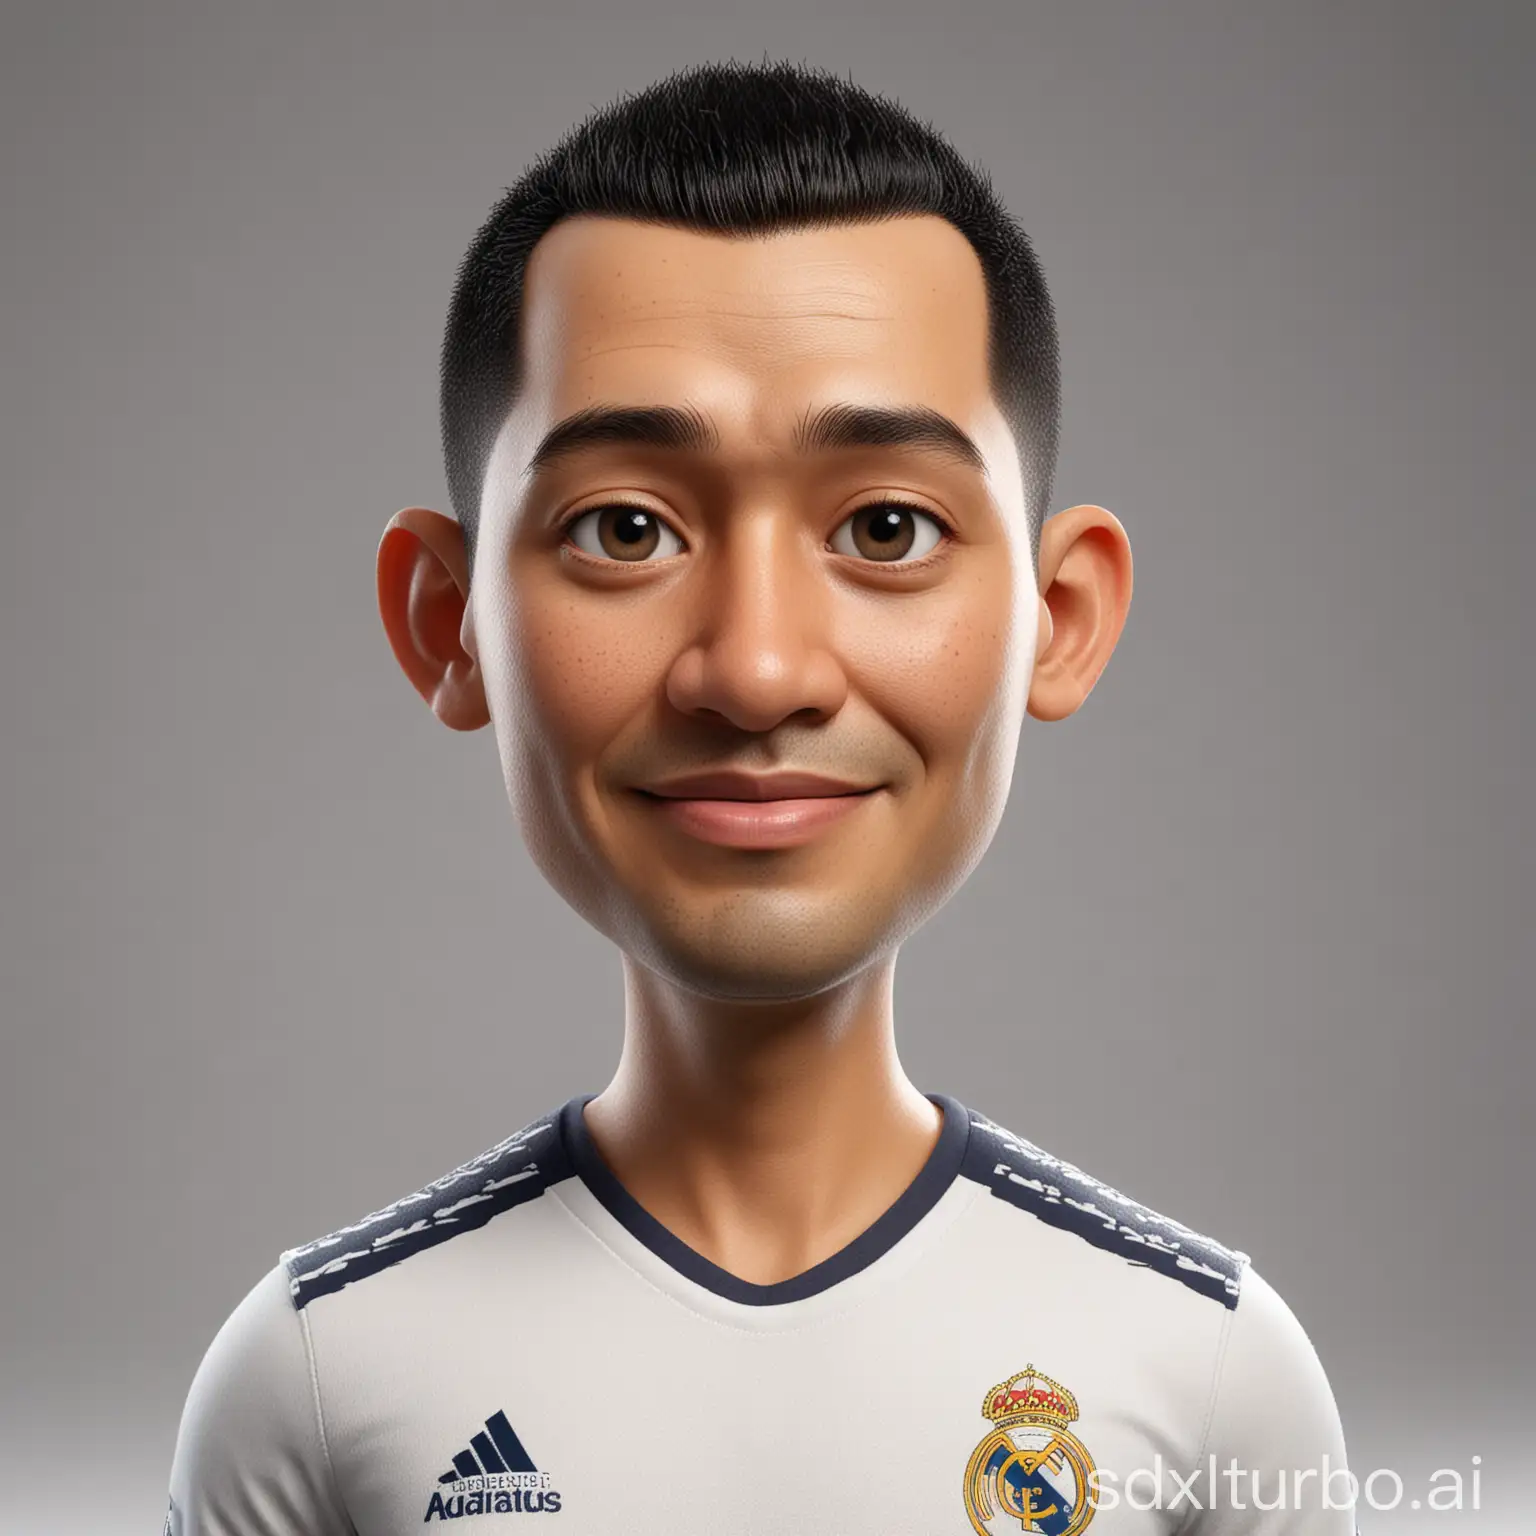 Create a full 3D cartoon style body with a big head. A 40 year old Indonesian man. Height, ideal body, oval face shape. beautiful, slightly round eyes, clean white skin, thin sweet smile. buzcut black hair. Wearing a real madrid shirt. Body position is clearly visible. The background is solid white. Use soft photography lighting, hair lighting, top lighting, side lighting. Highest quality photos, Uhd,16k